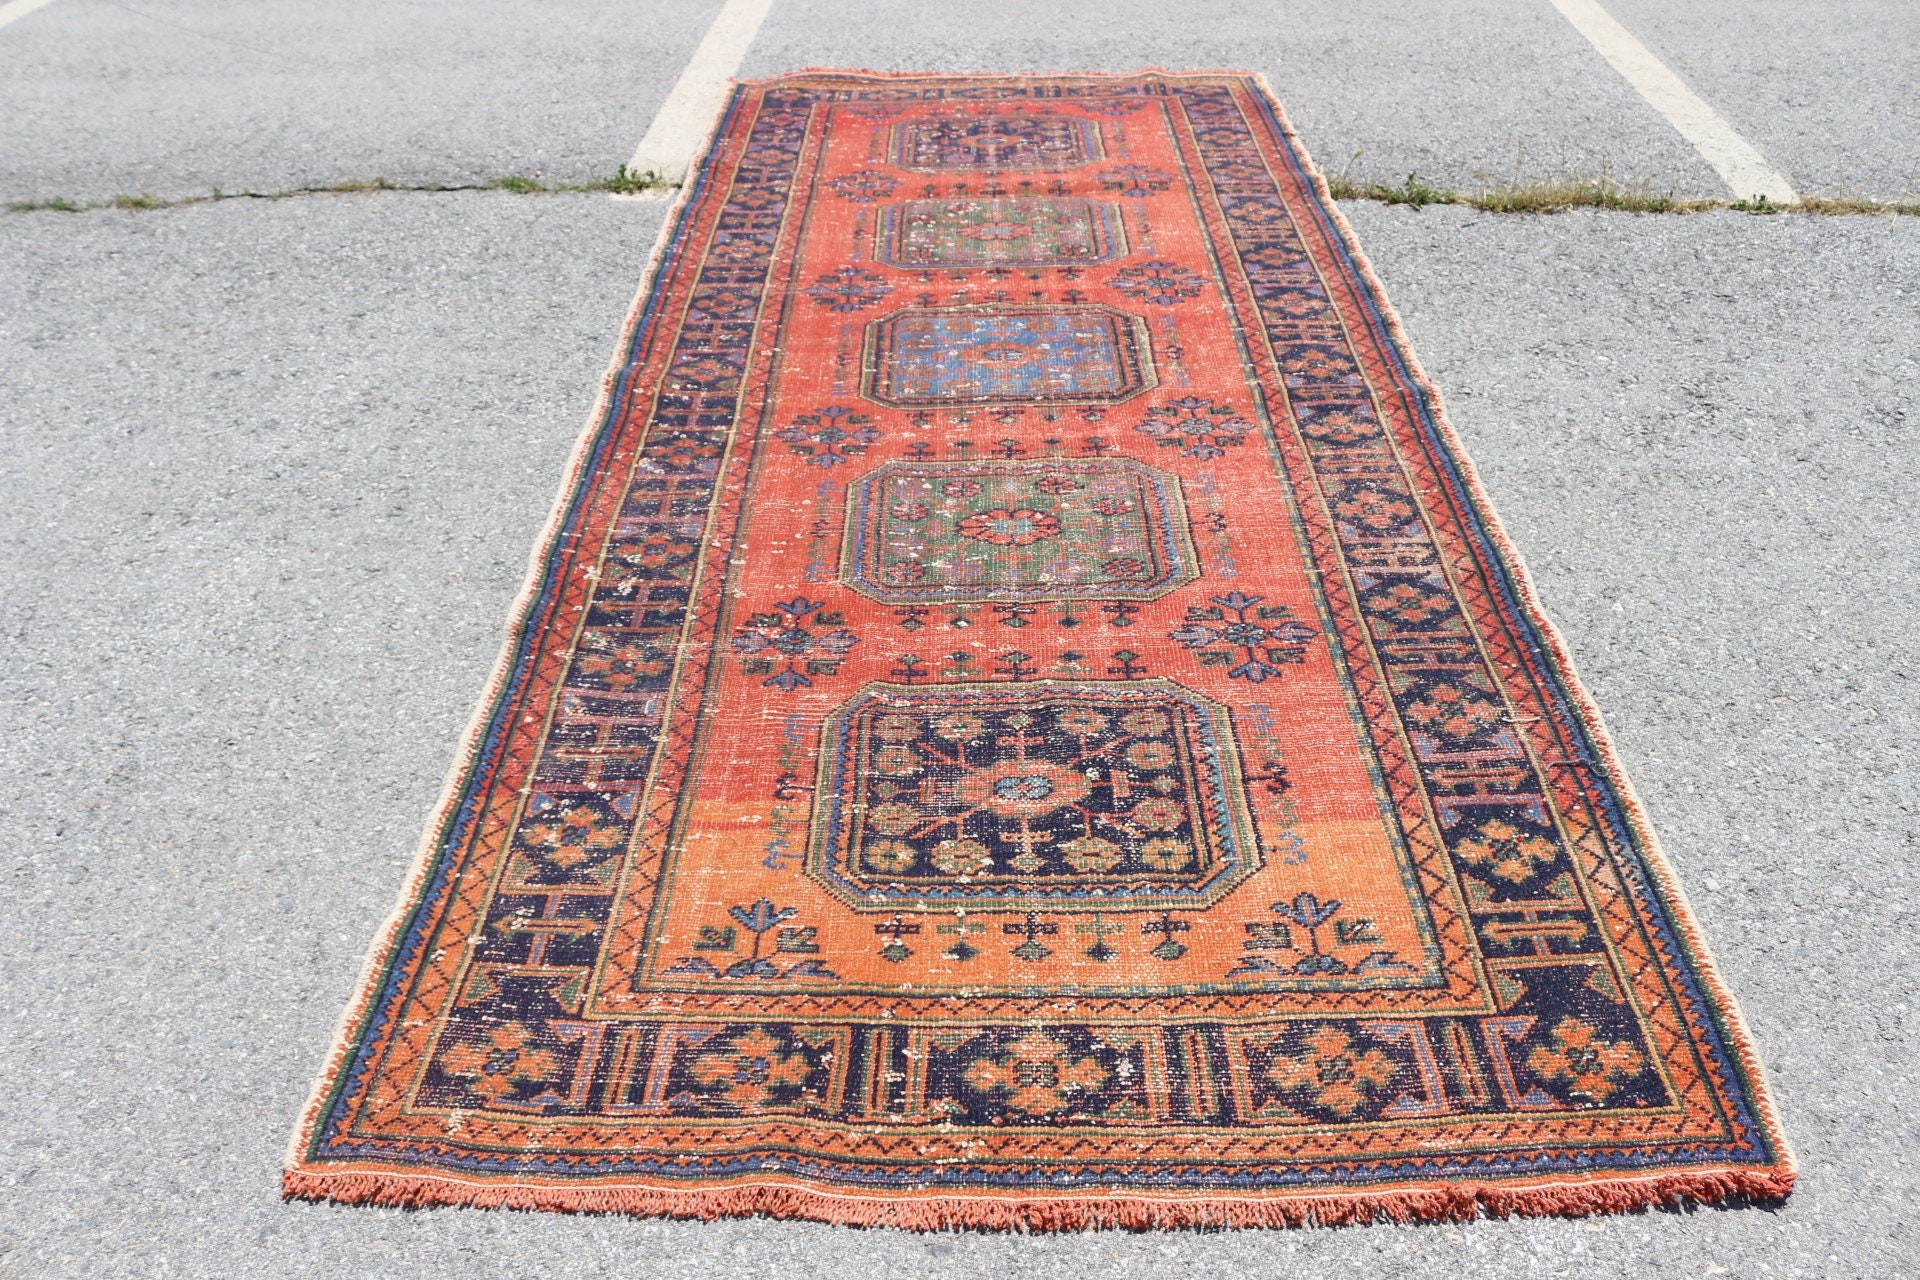 Turkish Rugs, Red Kitchen Rugs, Living Room Rugs, 4.8x11.2 ft Large Rug, Home Decor Rug, Vintage Rug, Antique Rugs, Dining Room Rugs